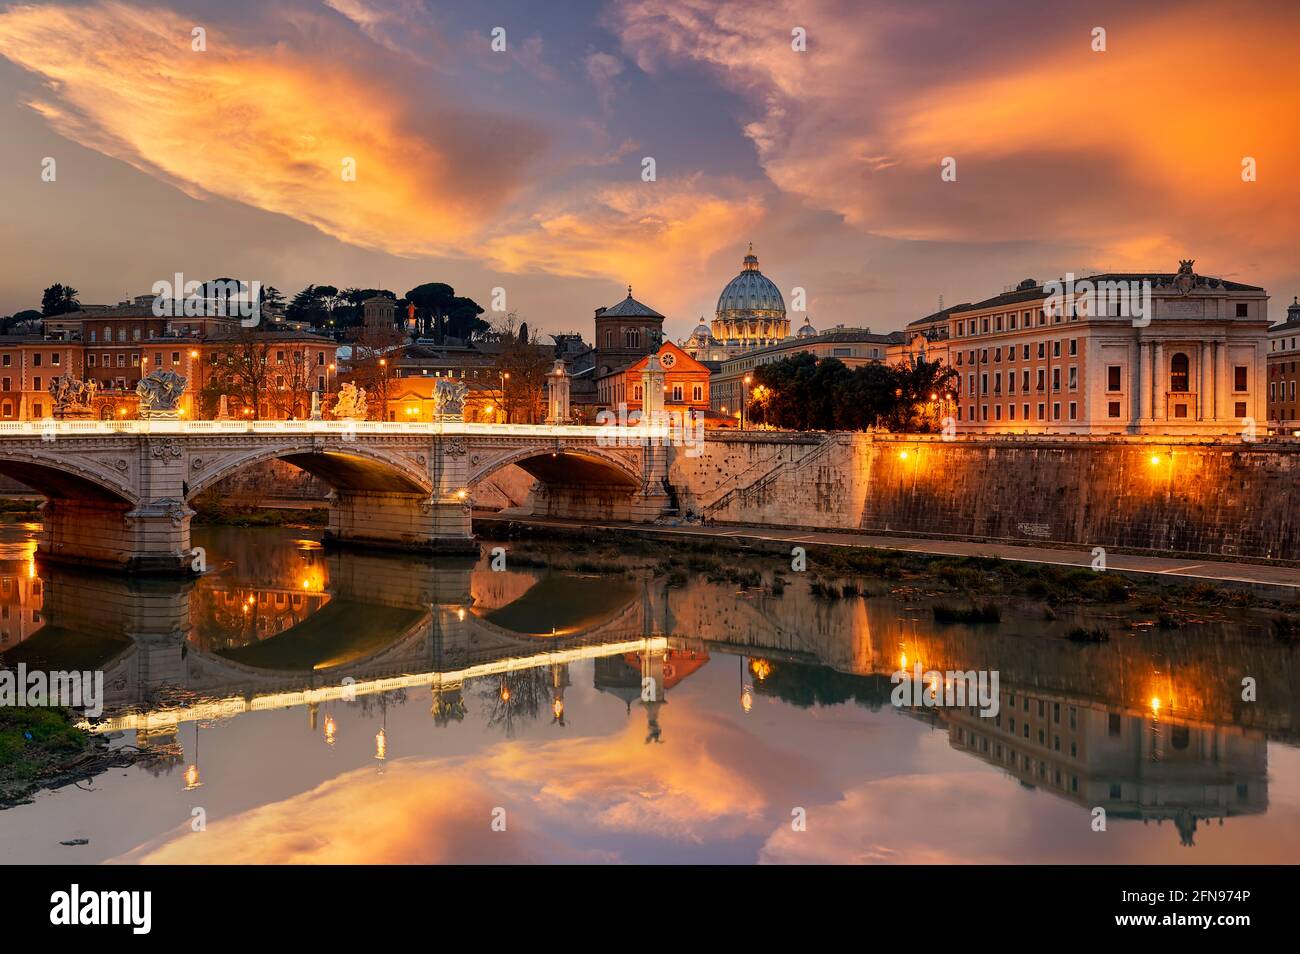 View of the Tiber River and Saint Peter's Basilica at sunset in Rome Italy Stock Photo